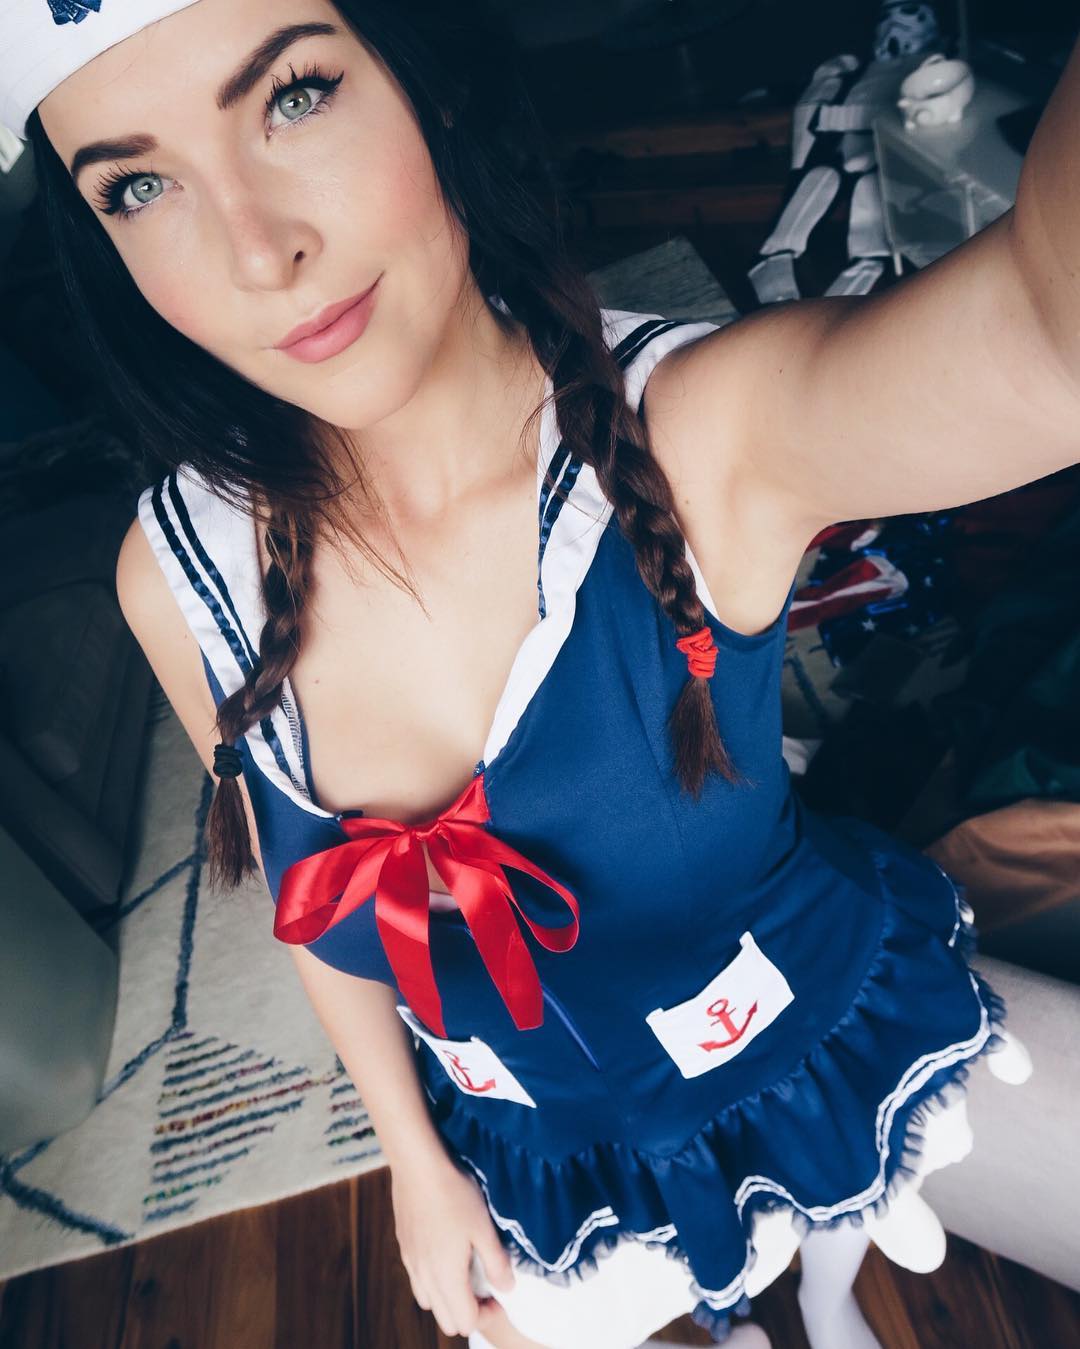 Kittyplays leaked - 🧡 Kittyplays Sexy Selfies Fansly Set Leaked Thotslife....